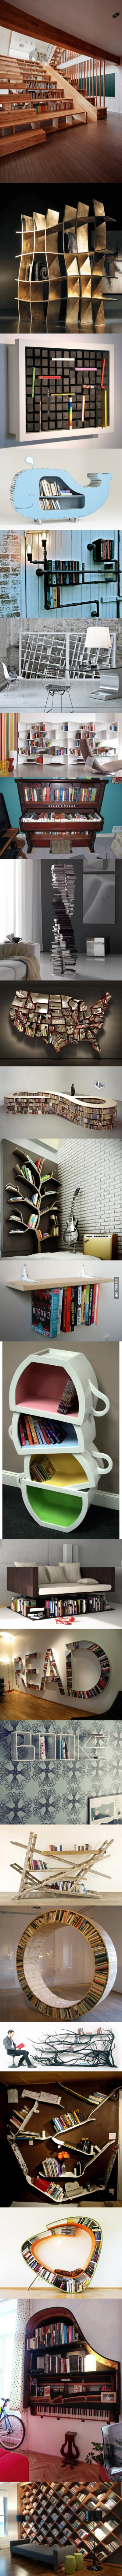 24 Sexy Bookshelves For Your Literature To Make Love To